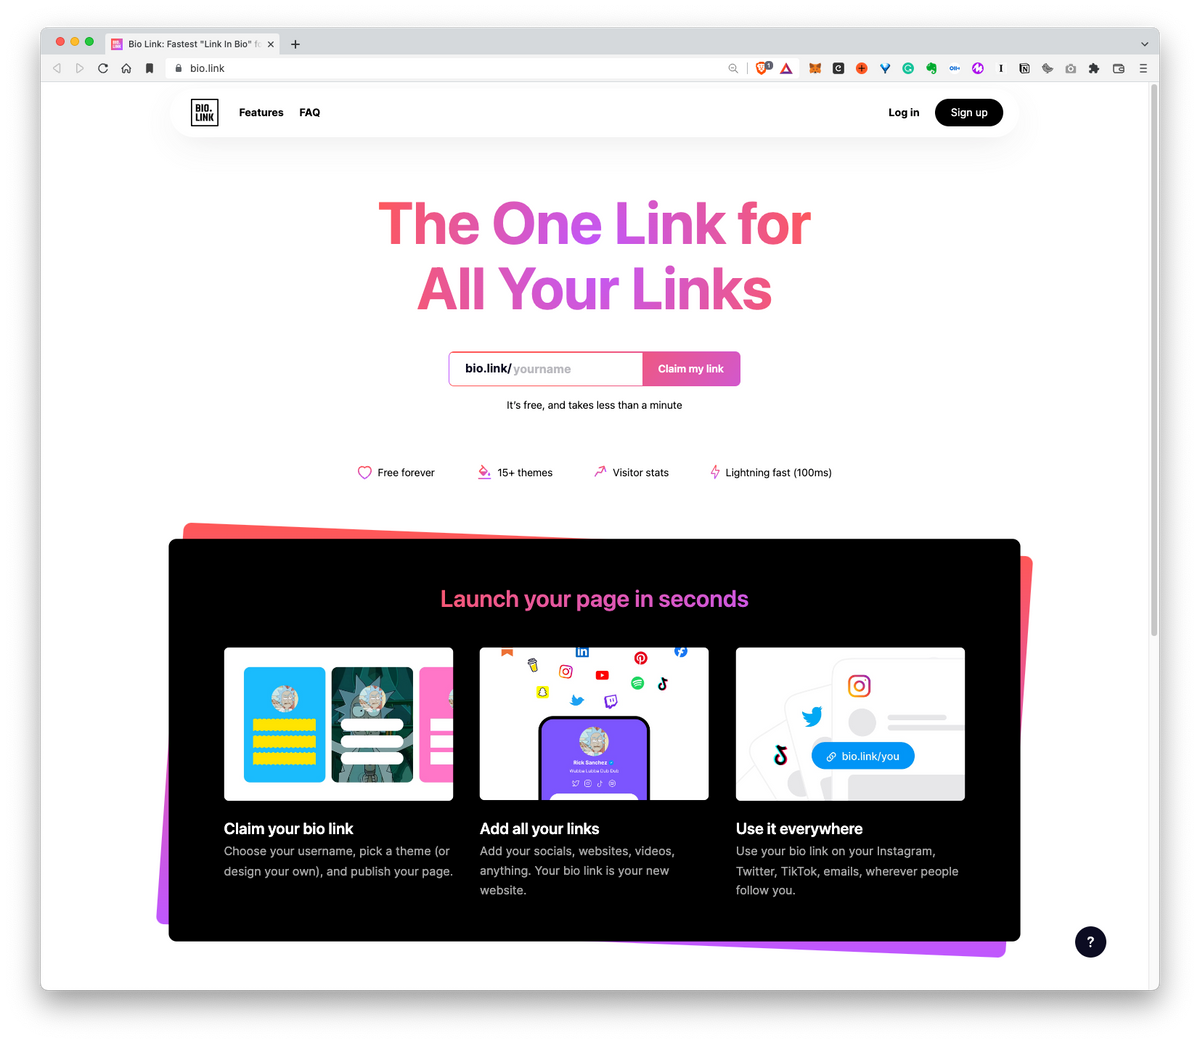 Bio.link: The One Link for All Your Links. It’s free, and takes less than a minute.